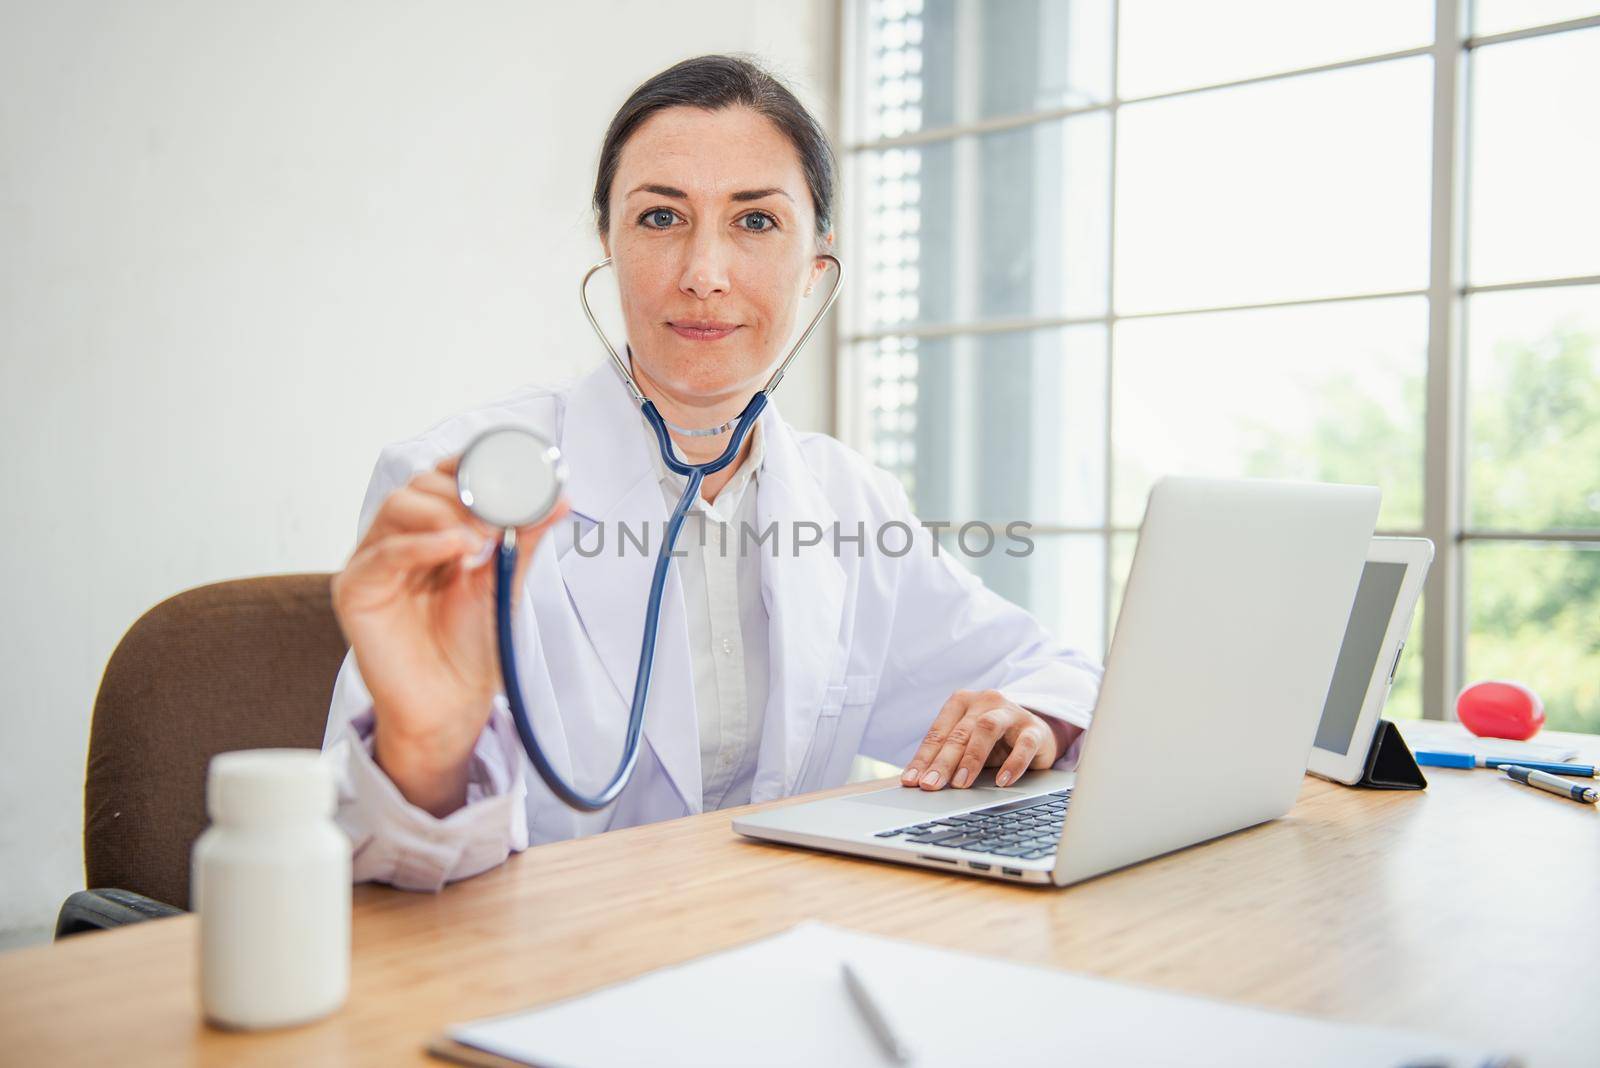 Medical Doctor is Examining Patient Health With Stethoscope in Hospital Examination Room, Female Physician Doctor is Diagnosing Physical Health Check Up for Patients. Medicine/Healthcare Concept by MahaHeang245789